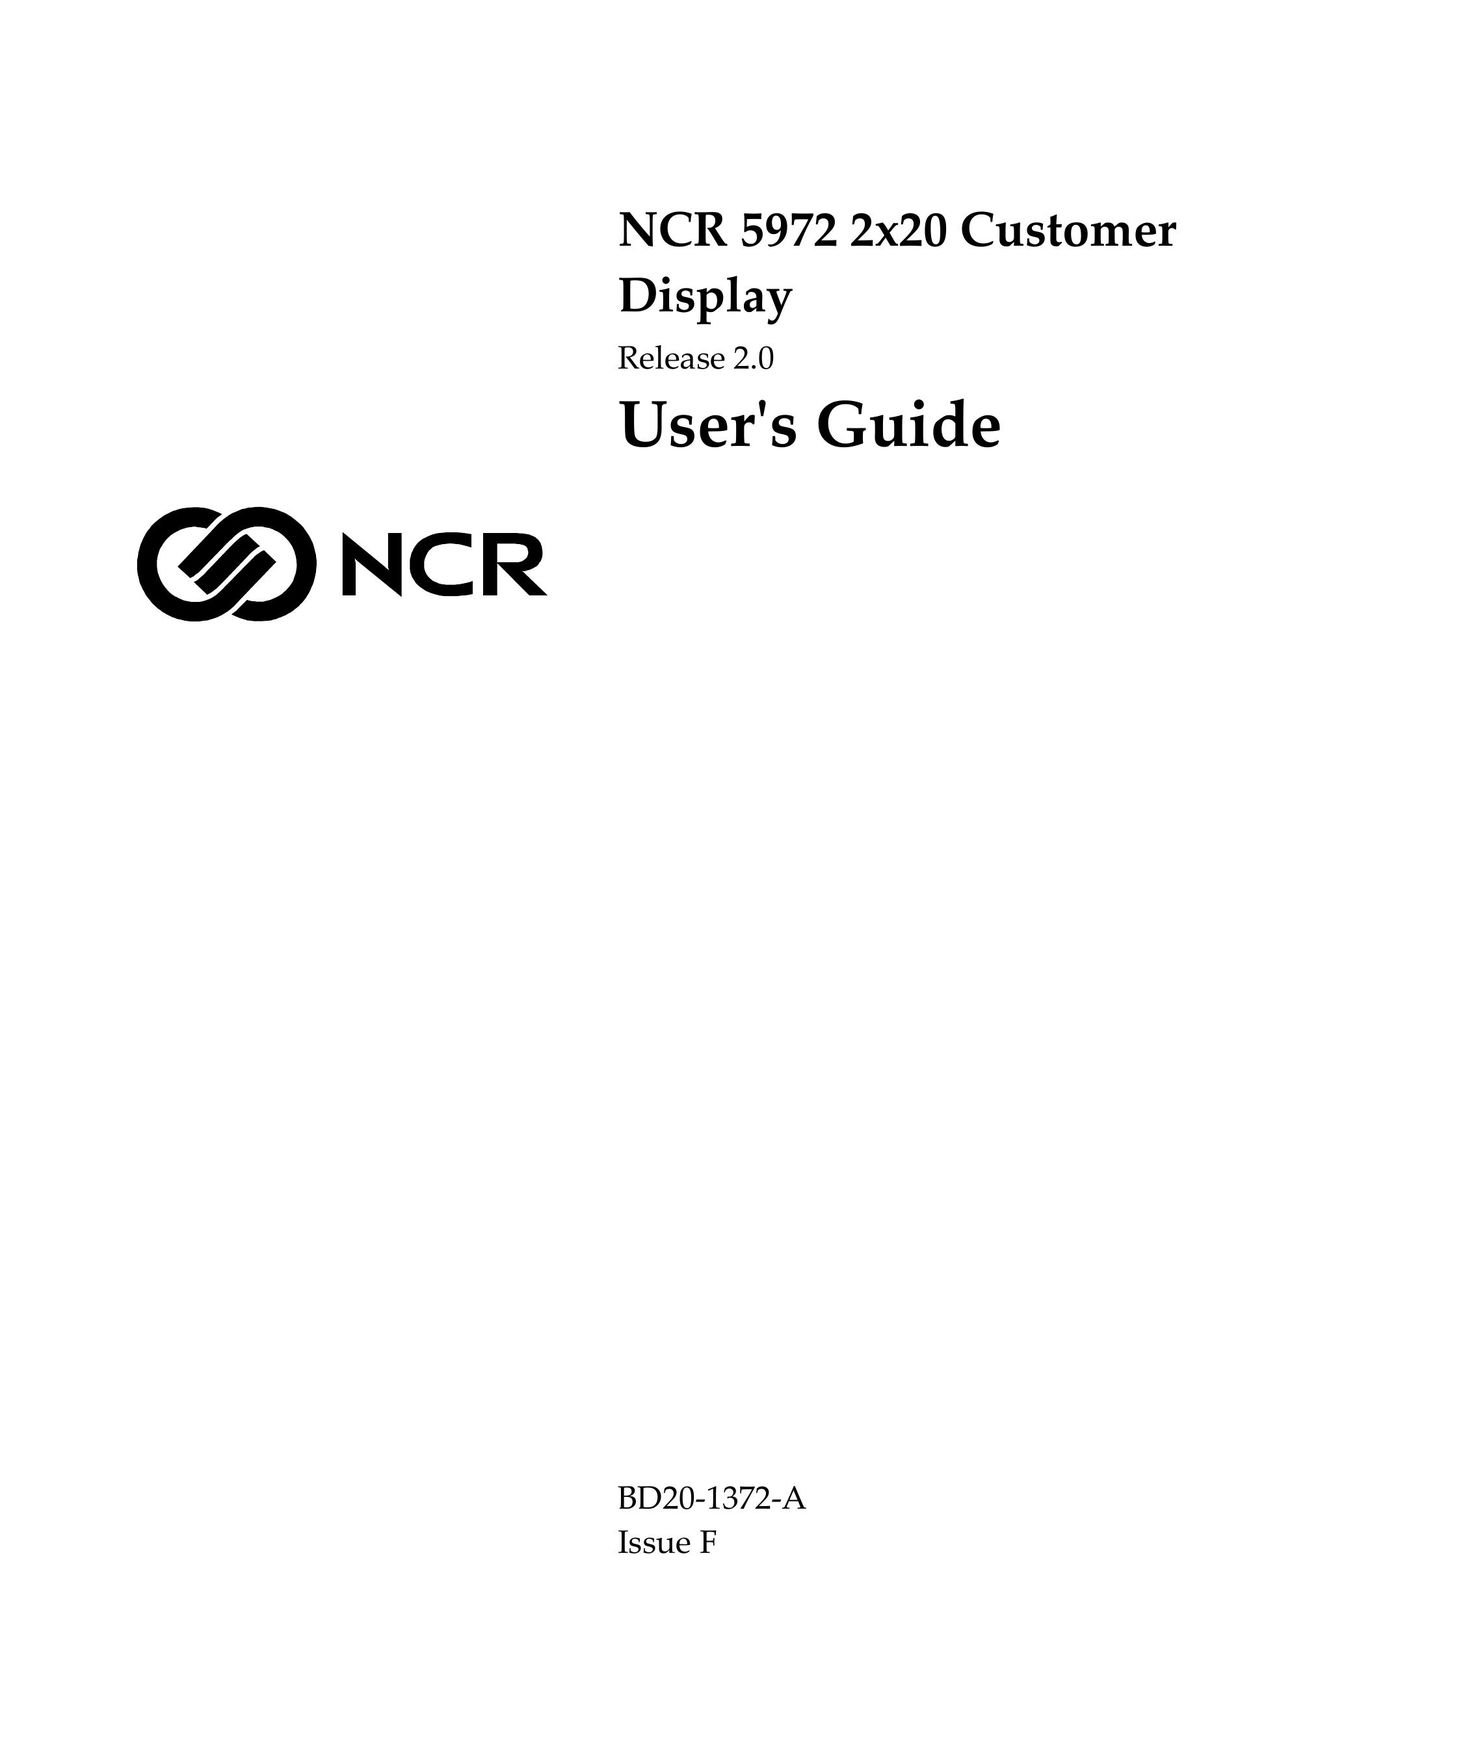 NCR NCR 5972 Home Theater Screen User Manual